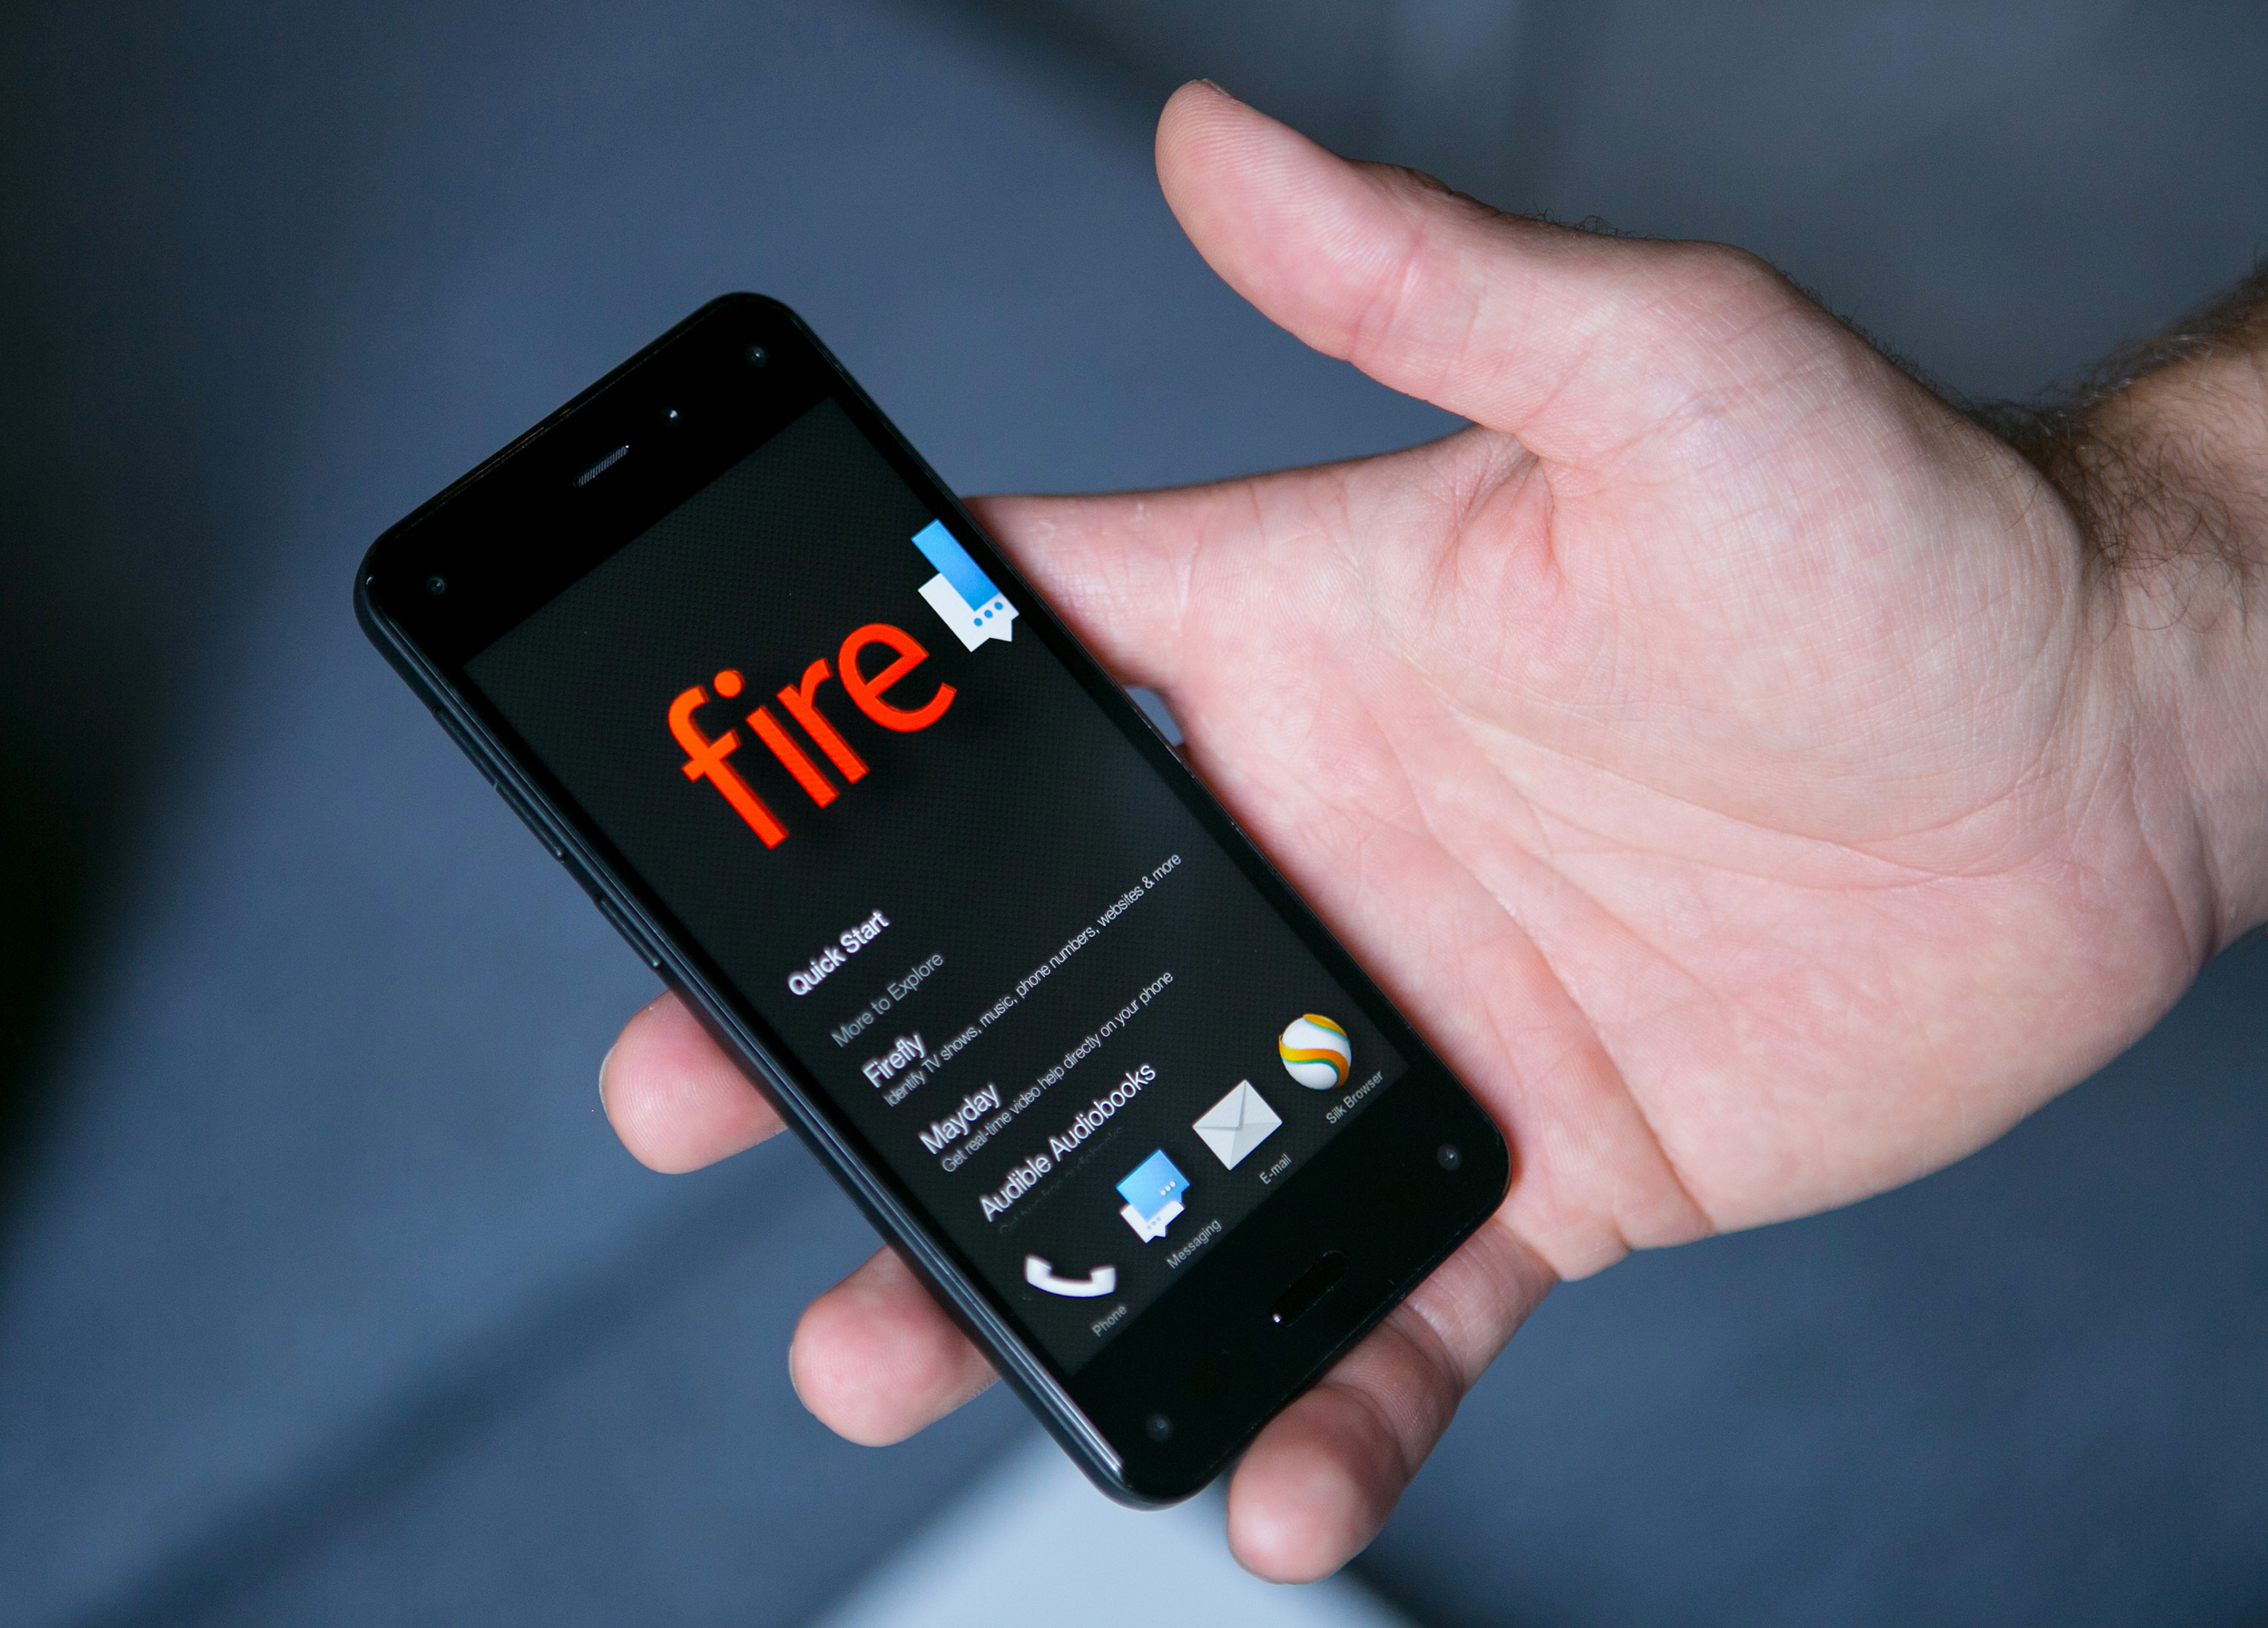 A man holds the new Fire smartphone by Amazon.com Inc. during demonstration at a a news conference in Berlin, Germany, on Monday, Sept. 8, 2014. (Bloomberg—Bloomberg via Getty Images)